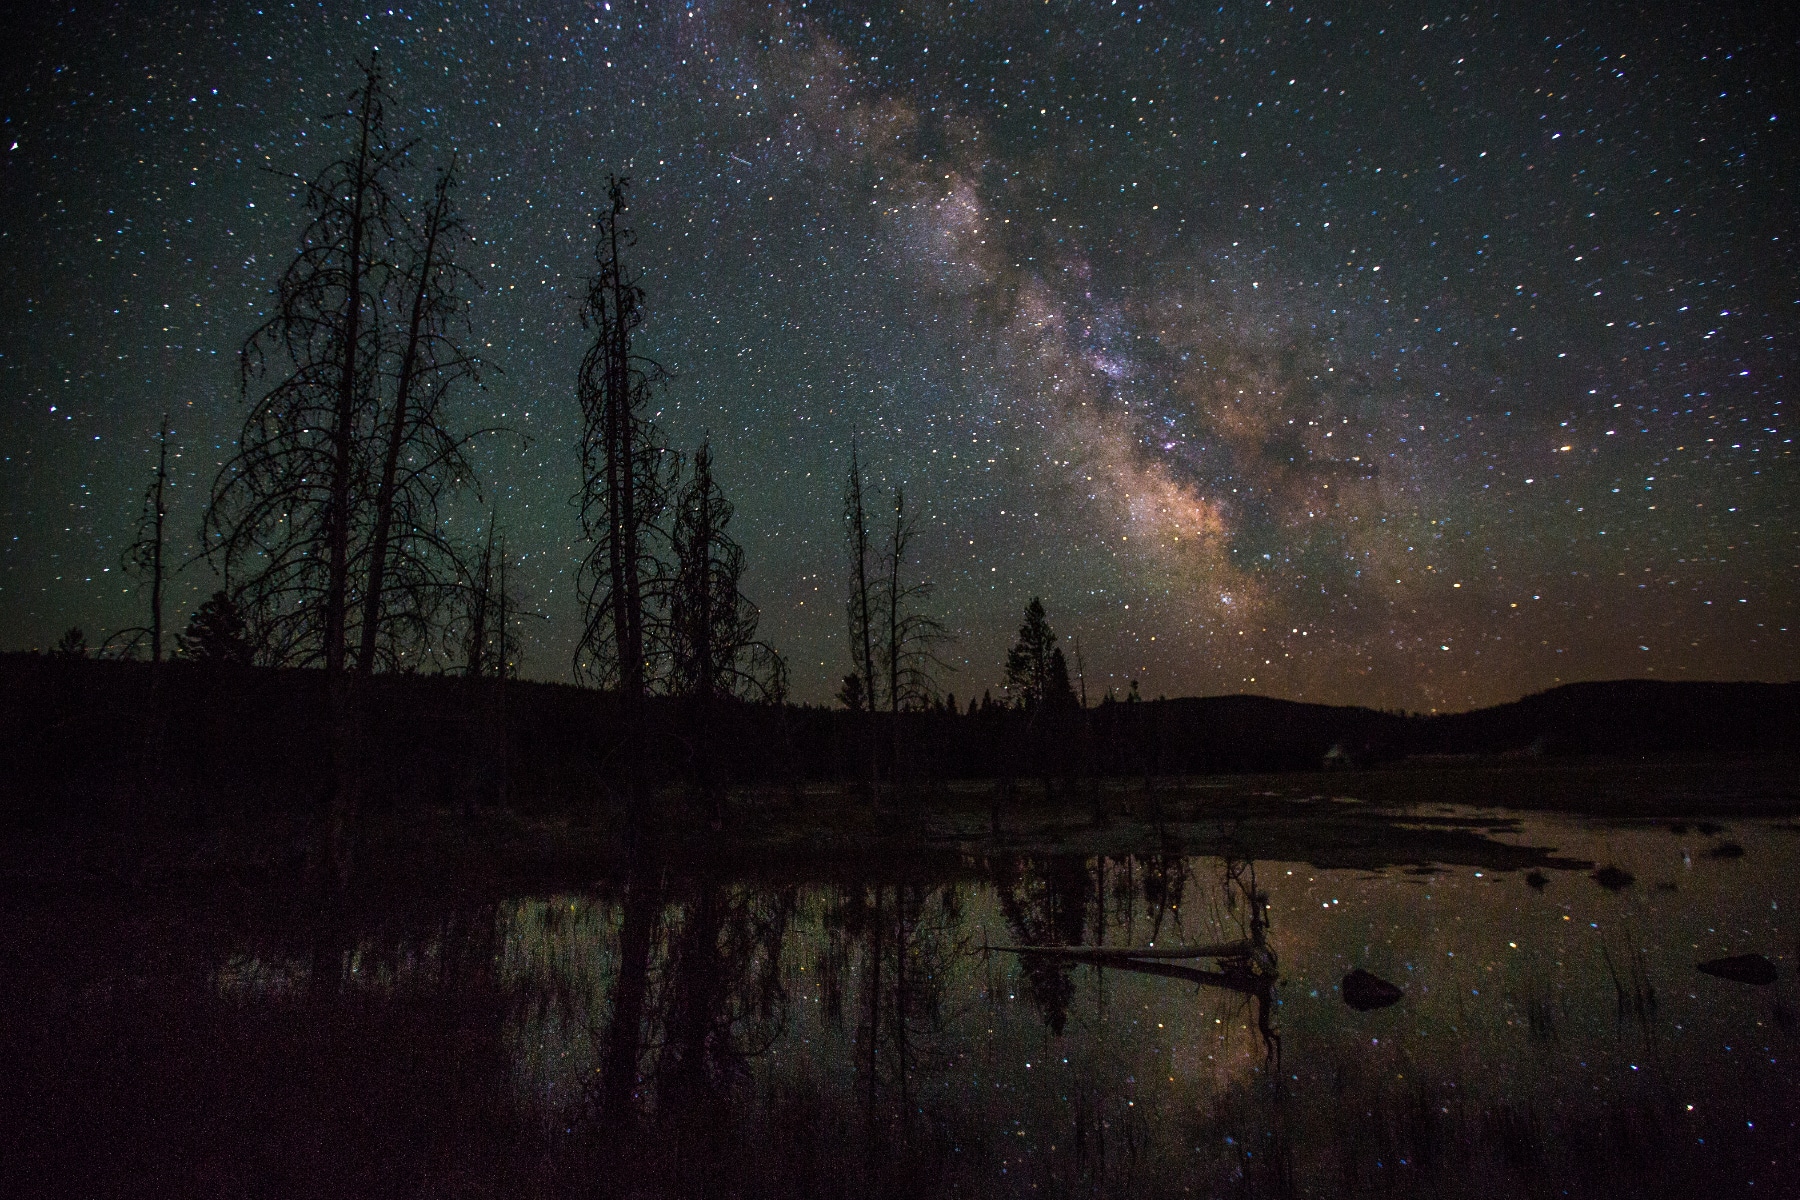 The Milky Way over Yellowstone National Park.